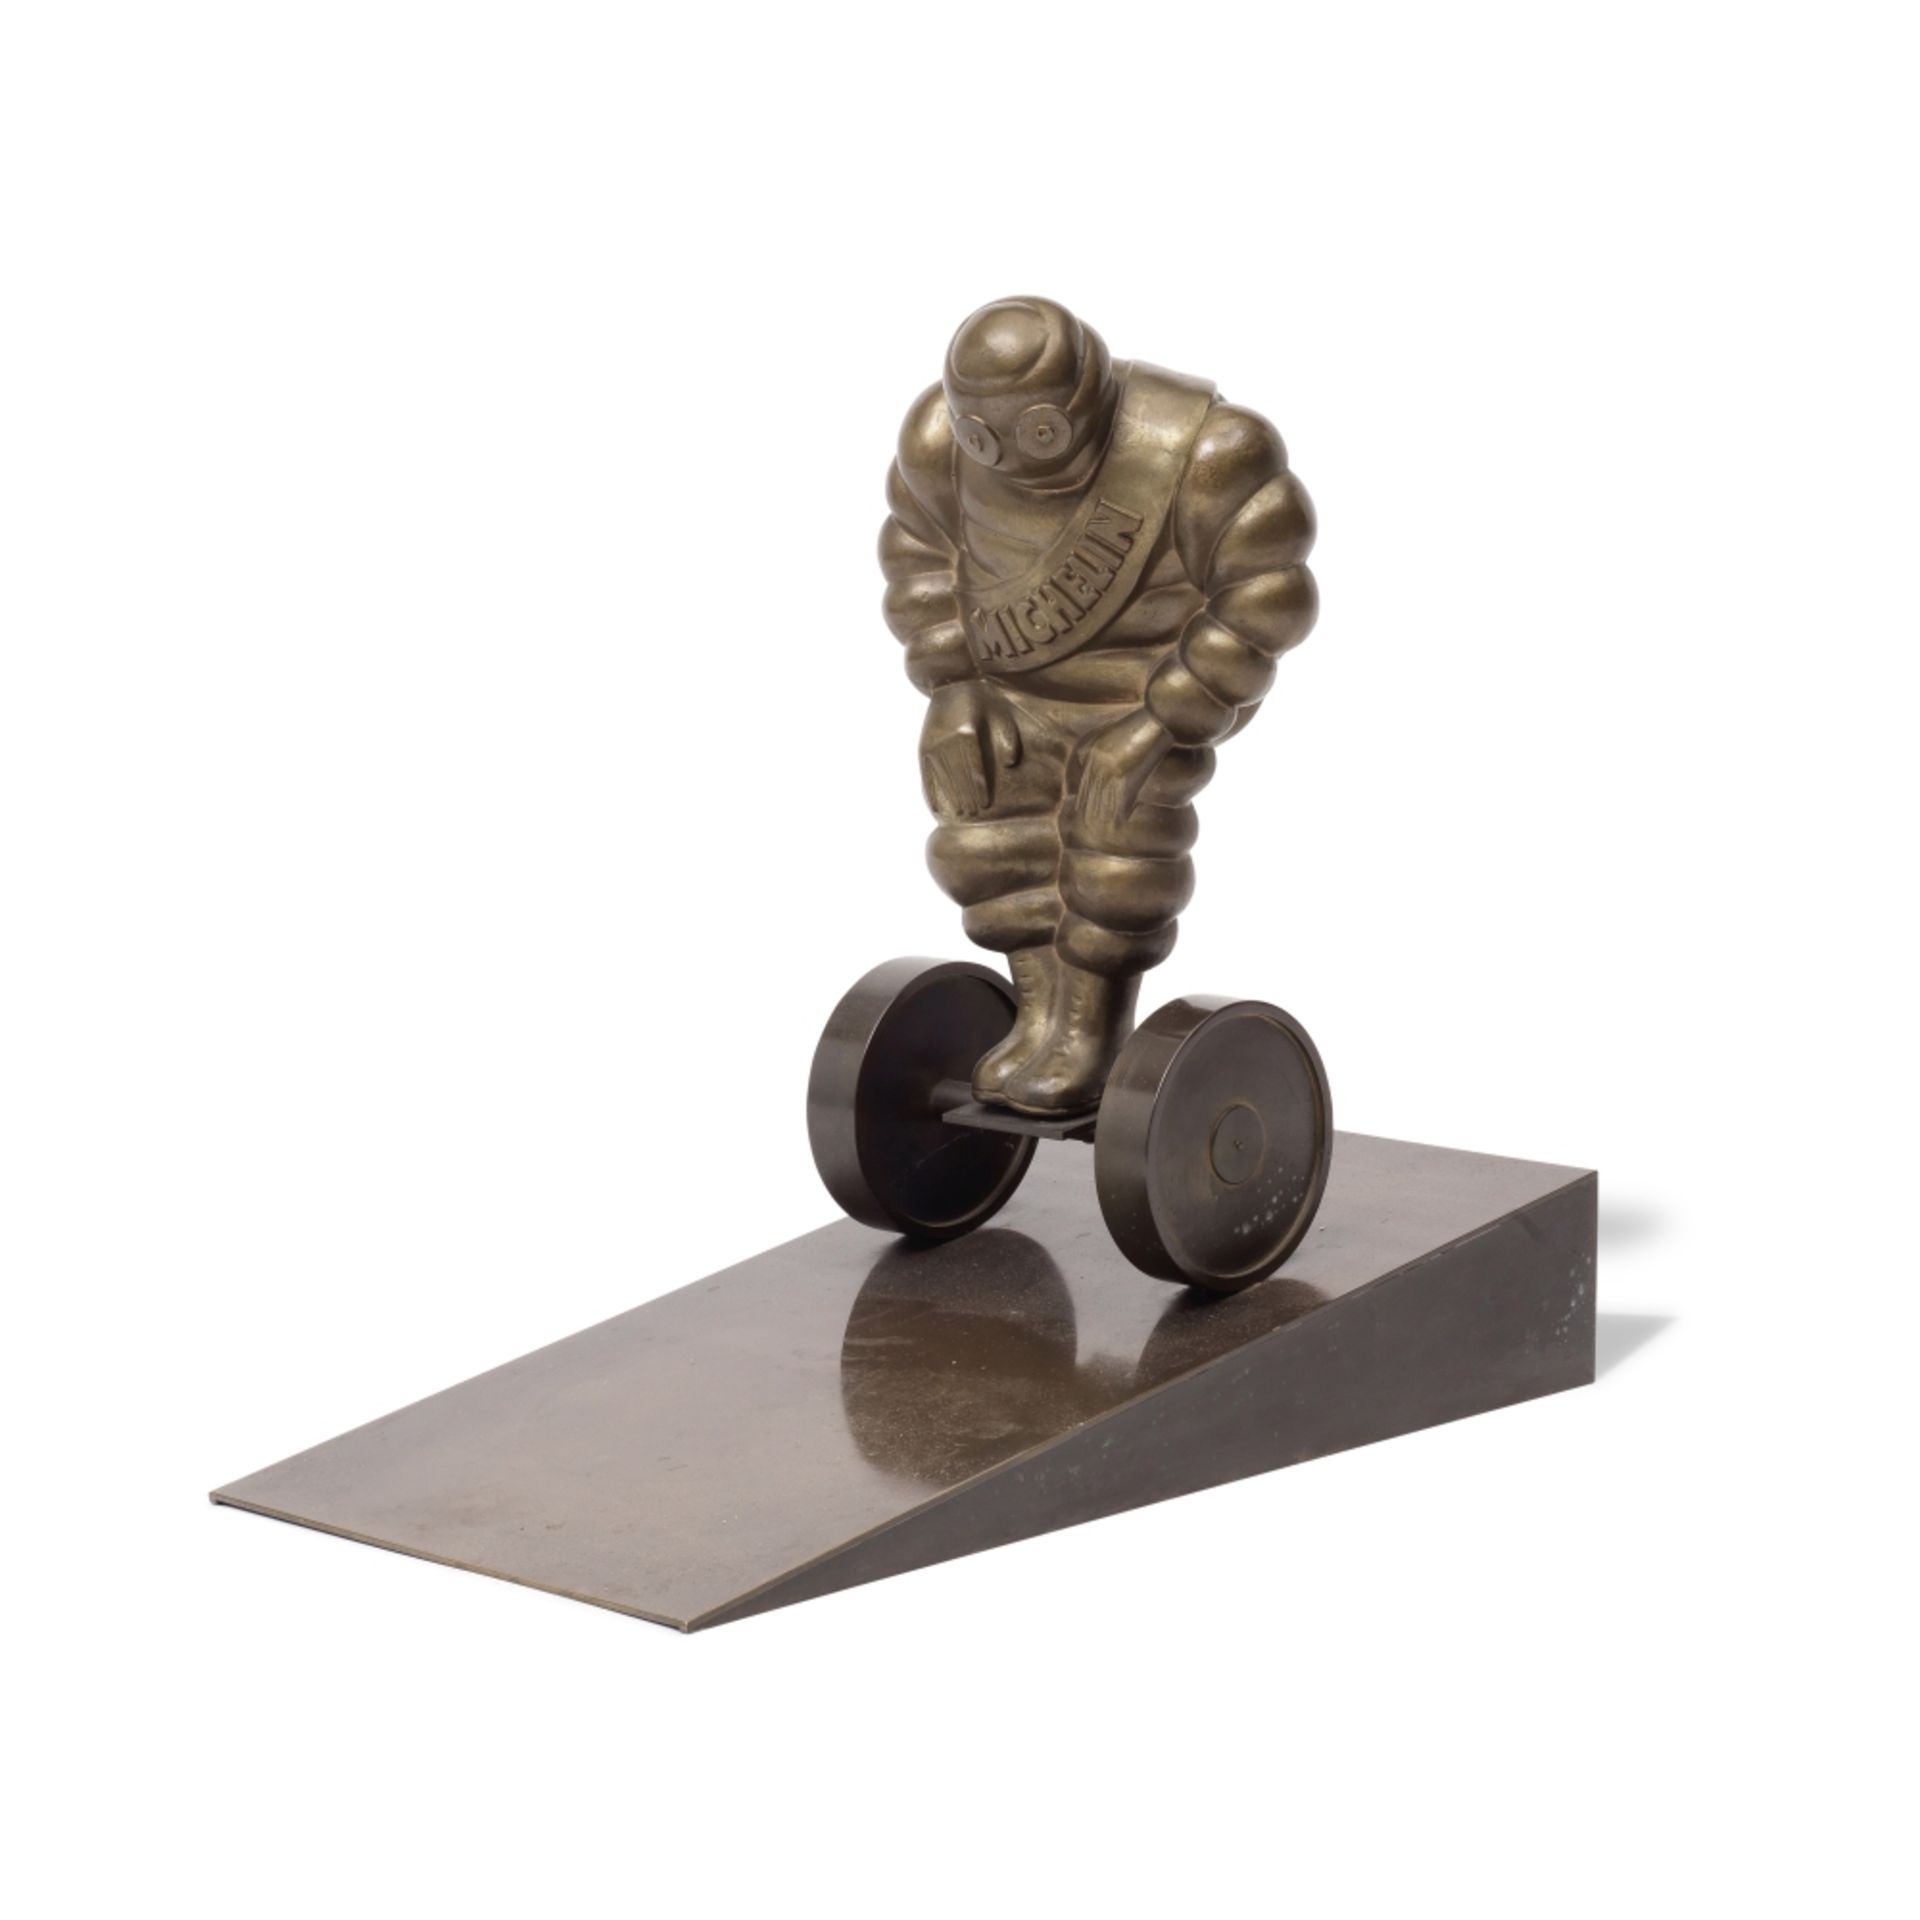 A bronze figural group of the Michelin Man